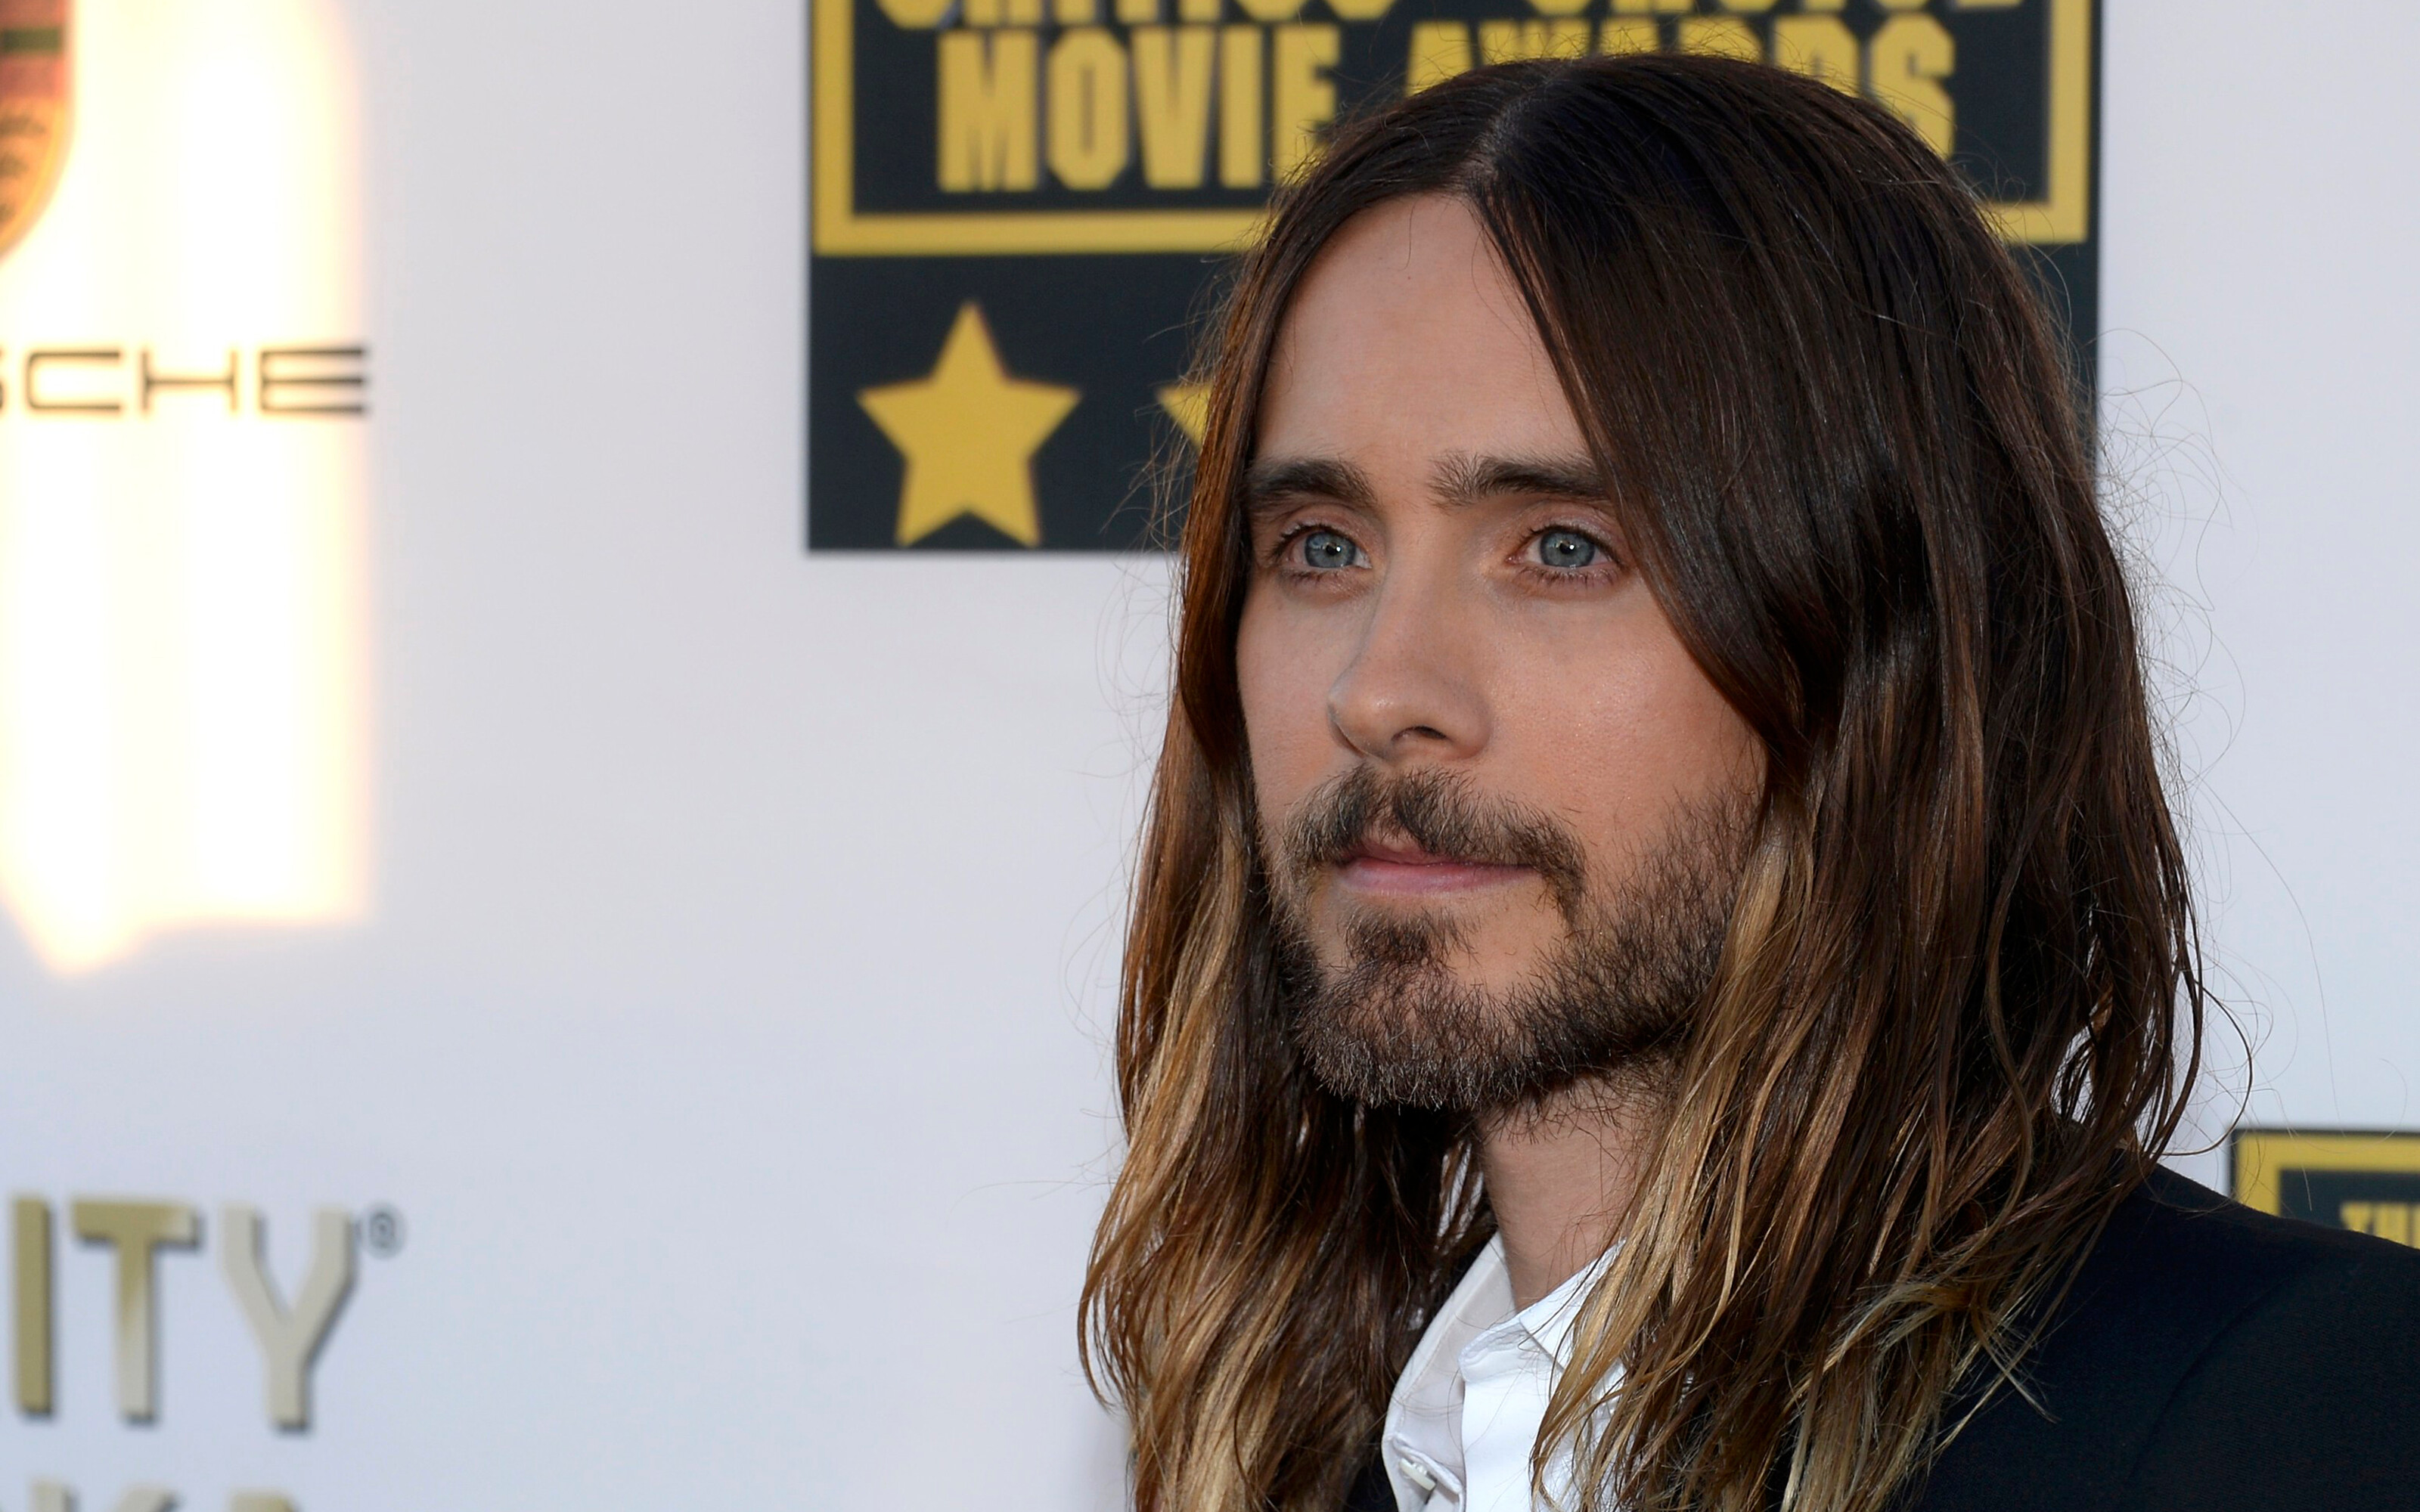 Jared Leto: A member of the rock band Thirty Seconds to Mars, A Beautiful Lie, 2005. 3200x2000 HD Wallpaper.